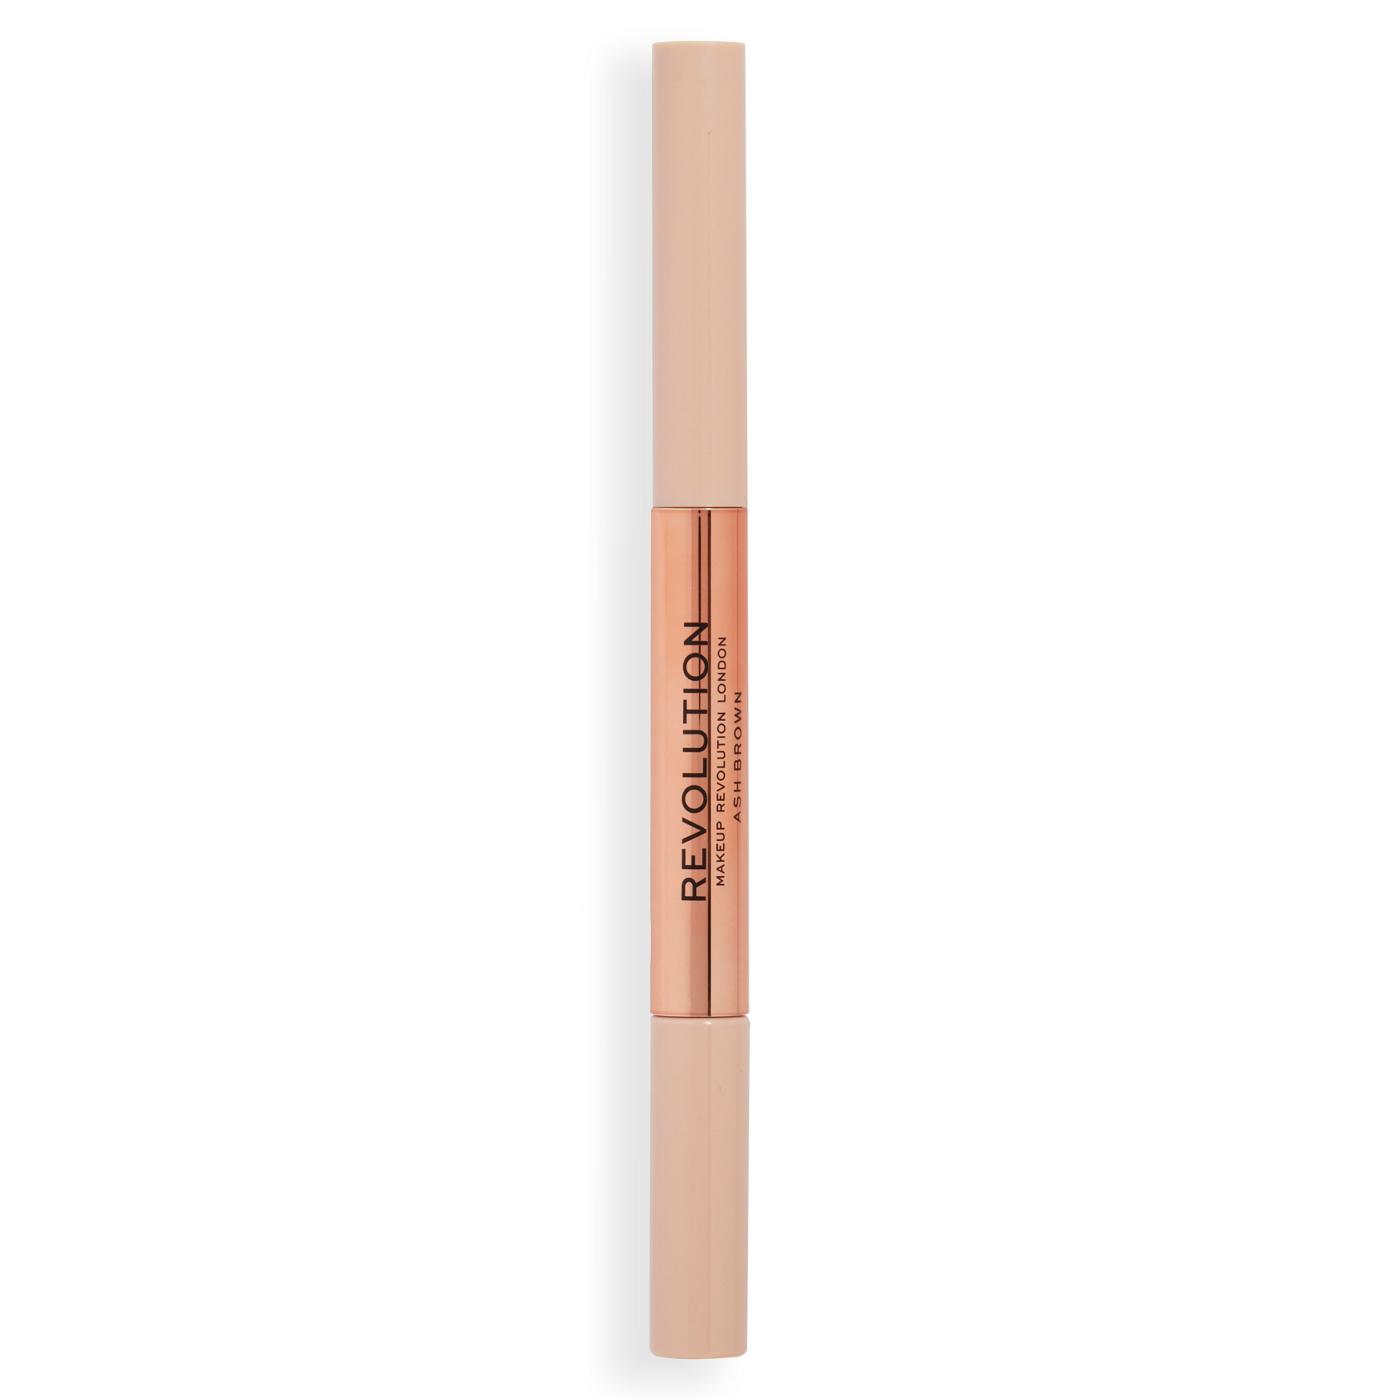 Makeup Revolution Fluffy Brow Duo Pencil - Ash Brown; image 3 of 4